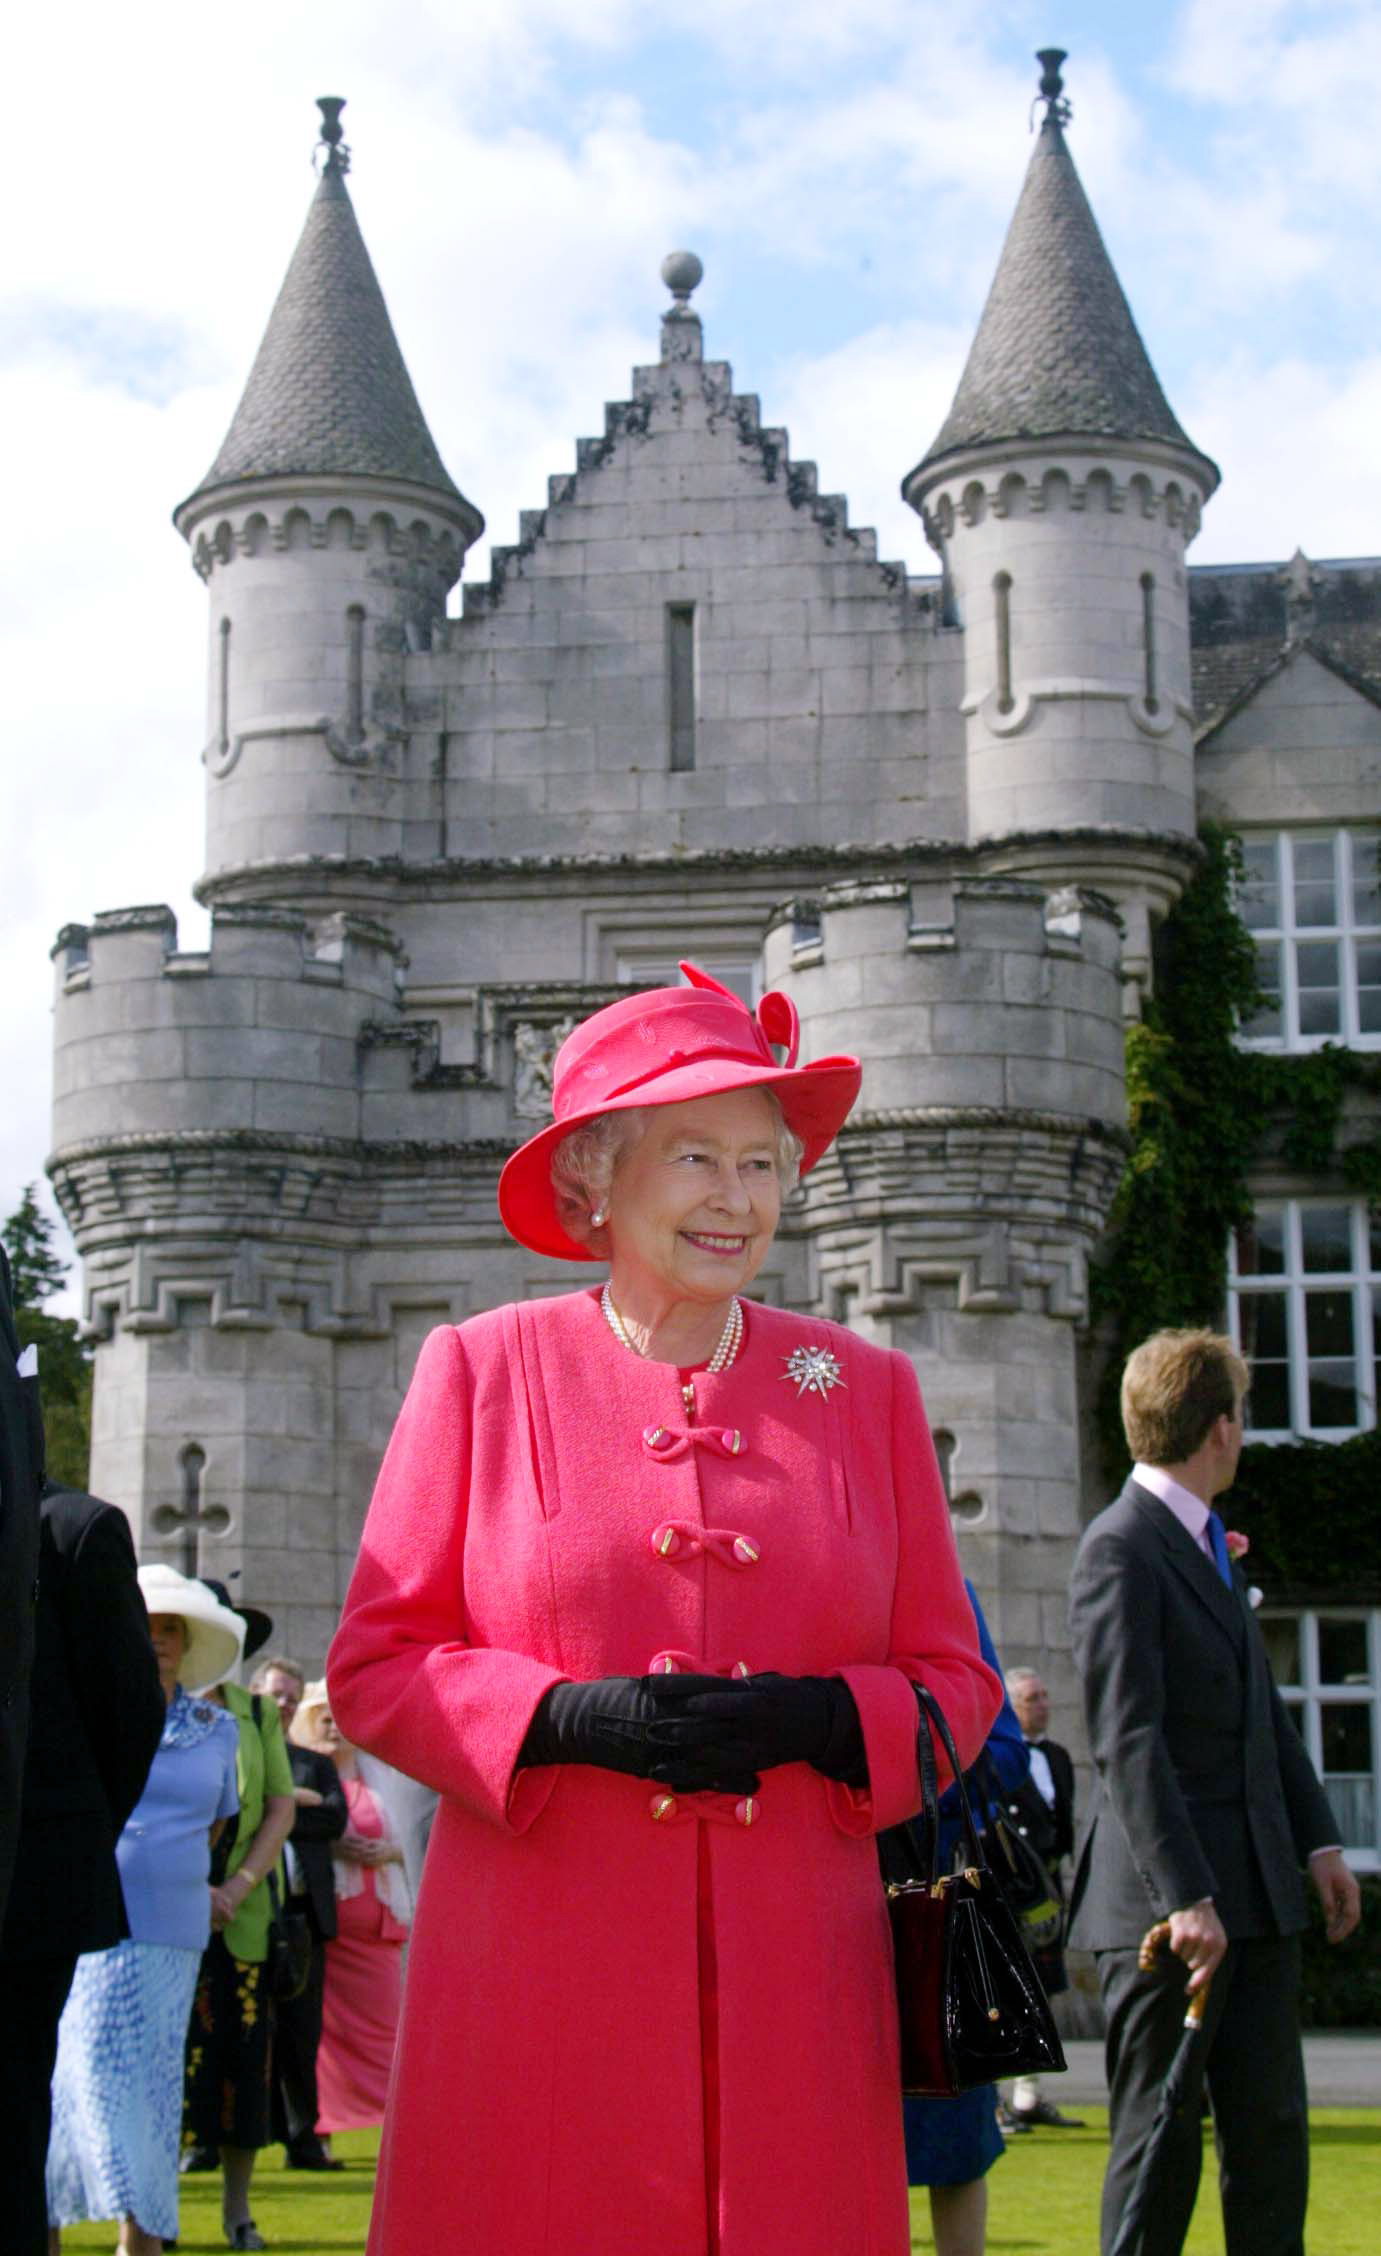 <p>A happy and smiling Queen Elizabeth ll walked across the grounds of her beloved Balmoral Castle -- her private summer home in the Scottish Highlands -- on Aug. 7, 2002, to meet some of the 3,000 guests who were invited to a Garden Party held on the final day of her Golden Jubilee tour celebrating 50 years on the throne. The monarch died there almost exactly 20 years later.</p>